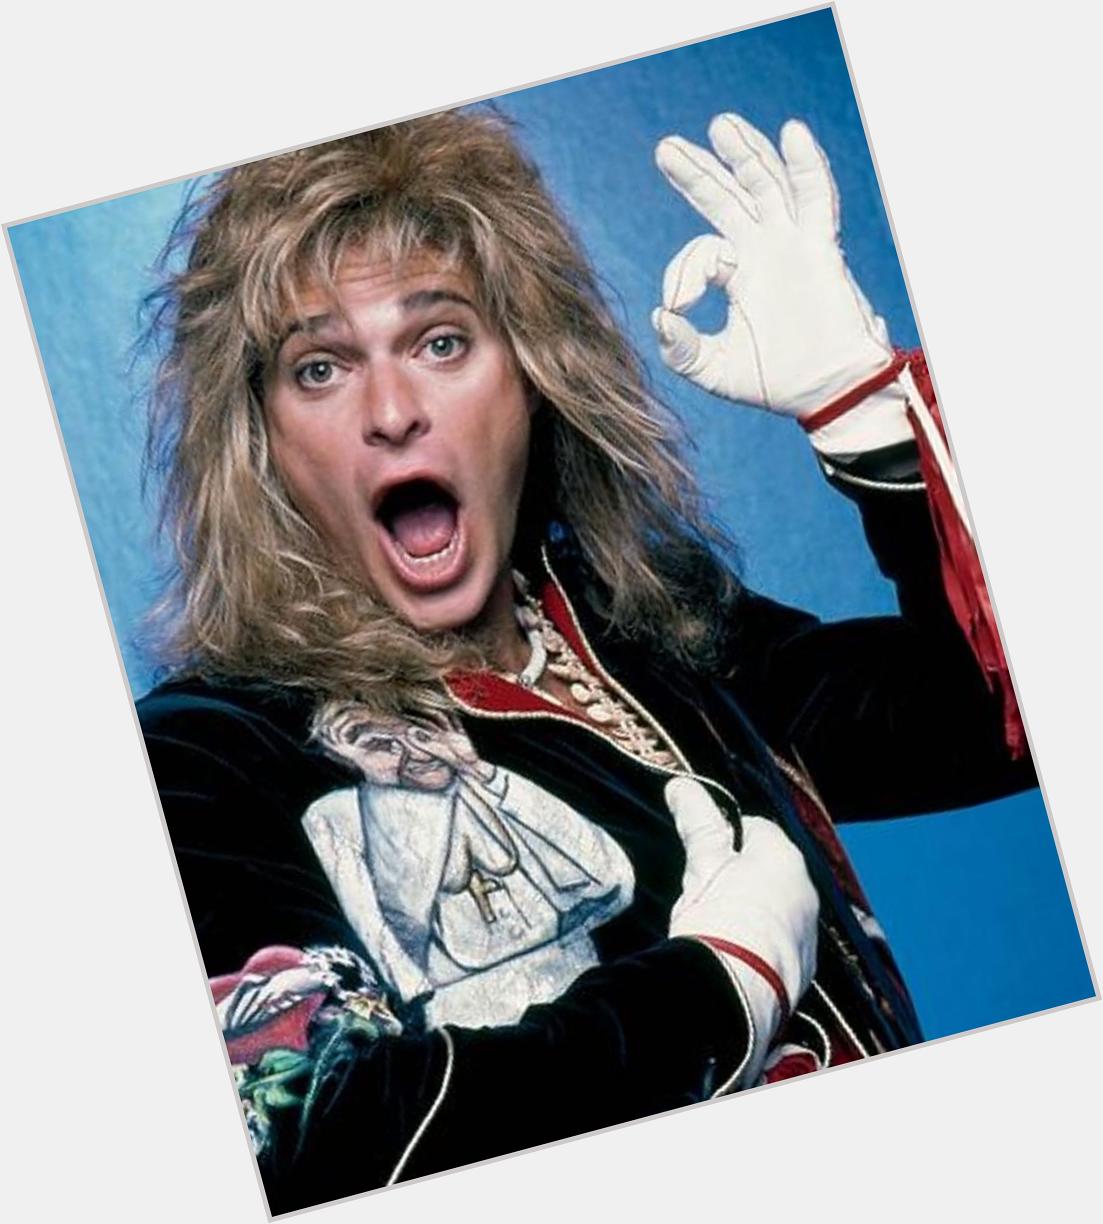 Happy Birthday to David Lee Roth!!!
61 years old today      